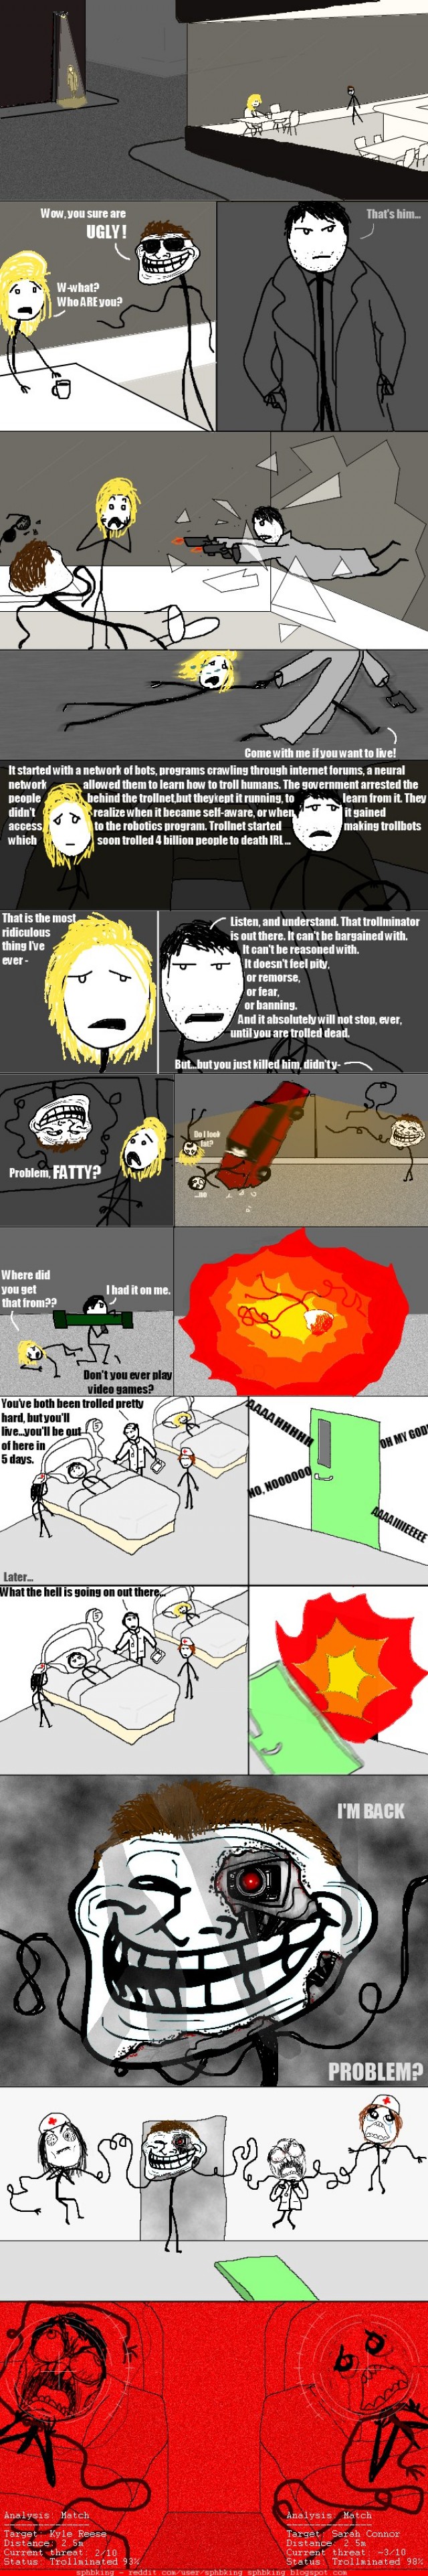 image tagged in funny,rage comics,internet,trolling